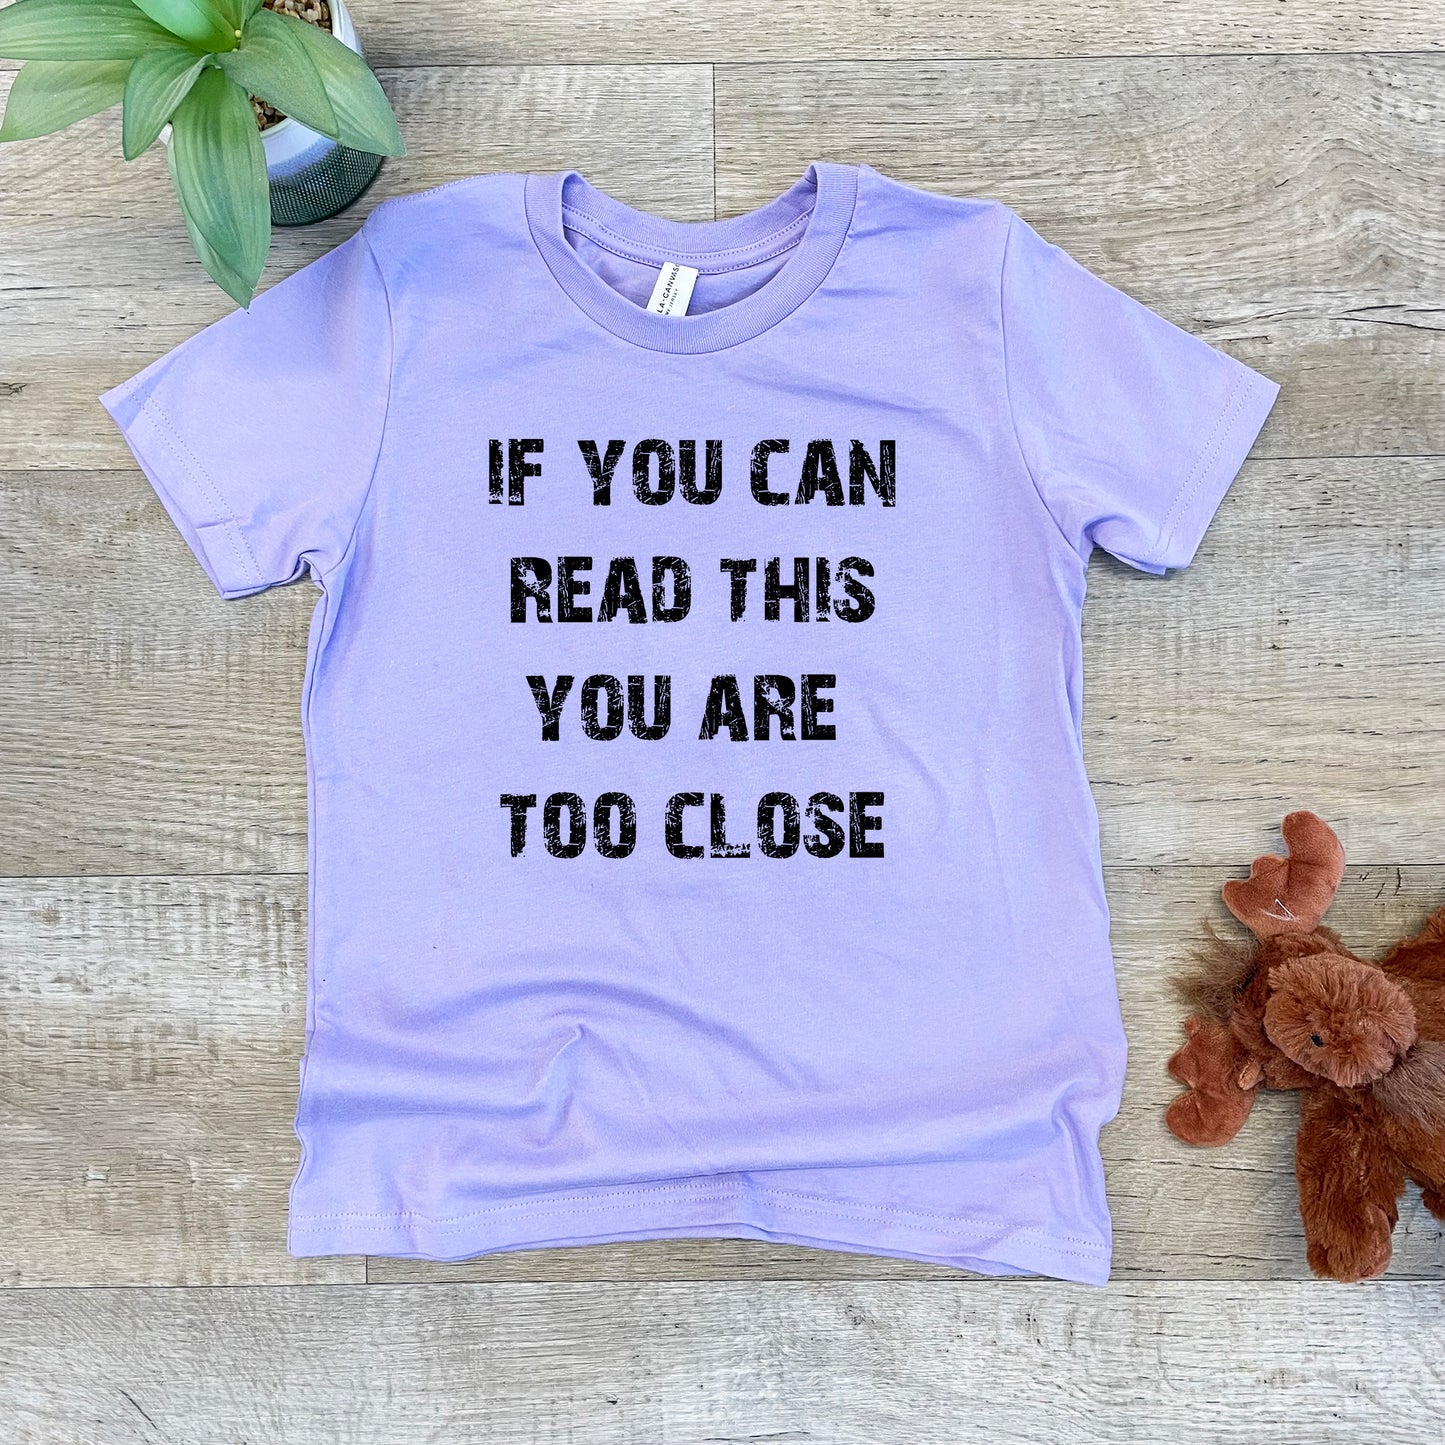 If You Can Read This You Are Too Close - Kid's Tee - Columbia Blue or Lavender